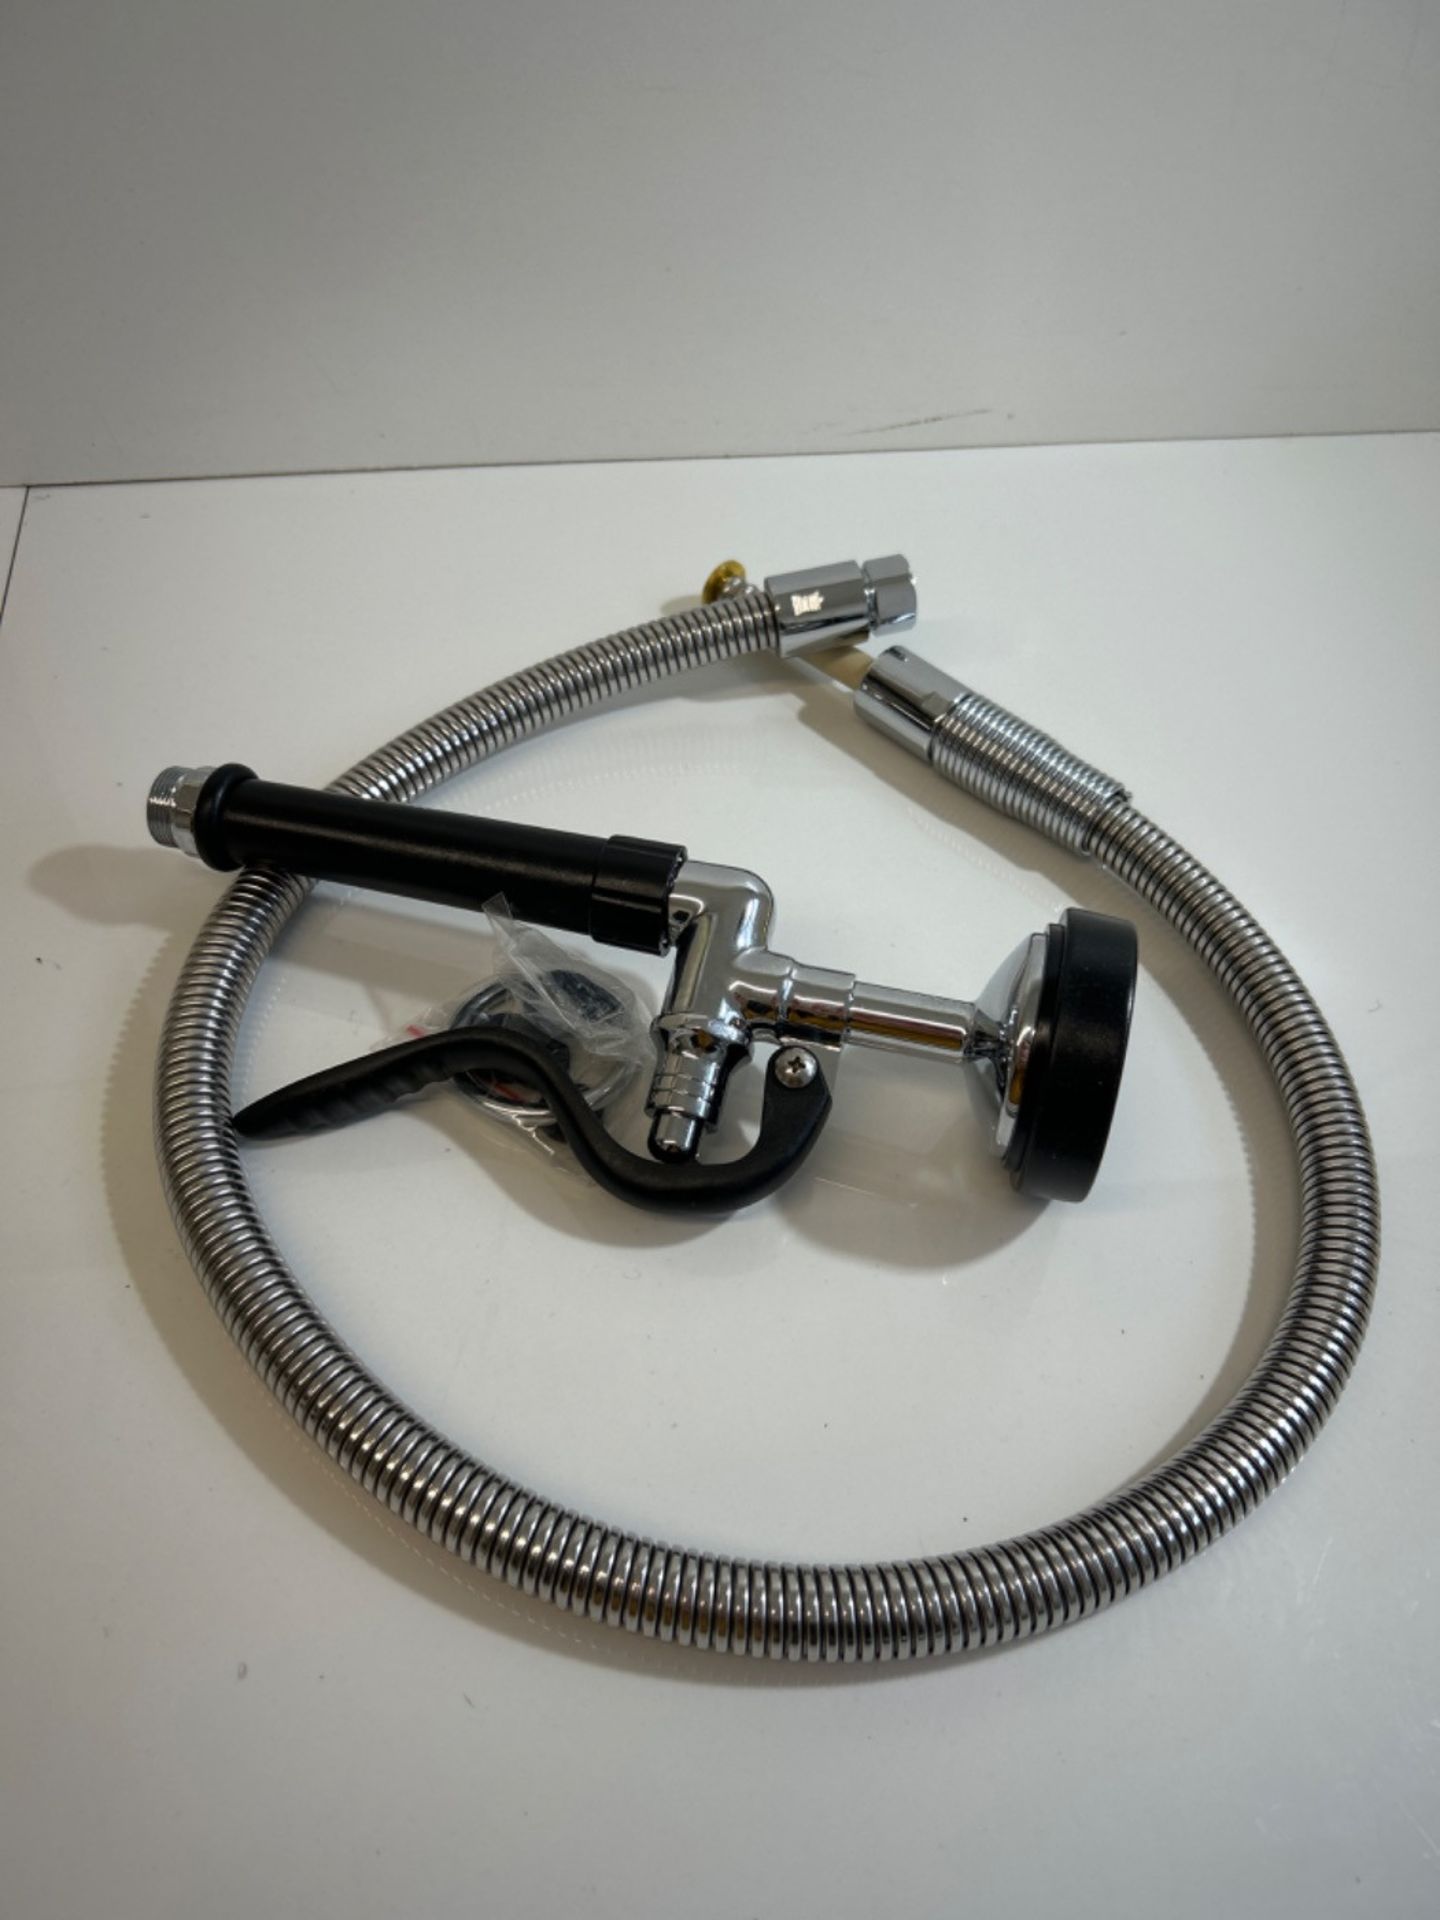 Pre-Rinse Replacement Kit - High Pressure Spray Head and Stainless Steel Hose Connection for Commer - Image 3 of 3